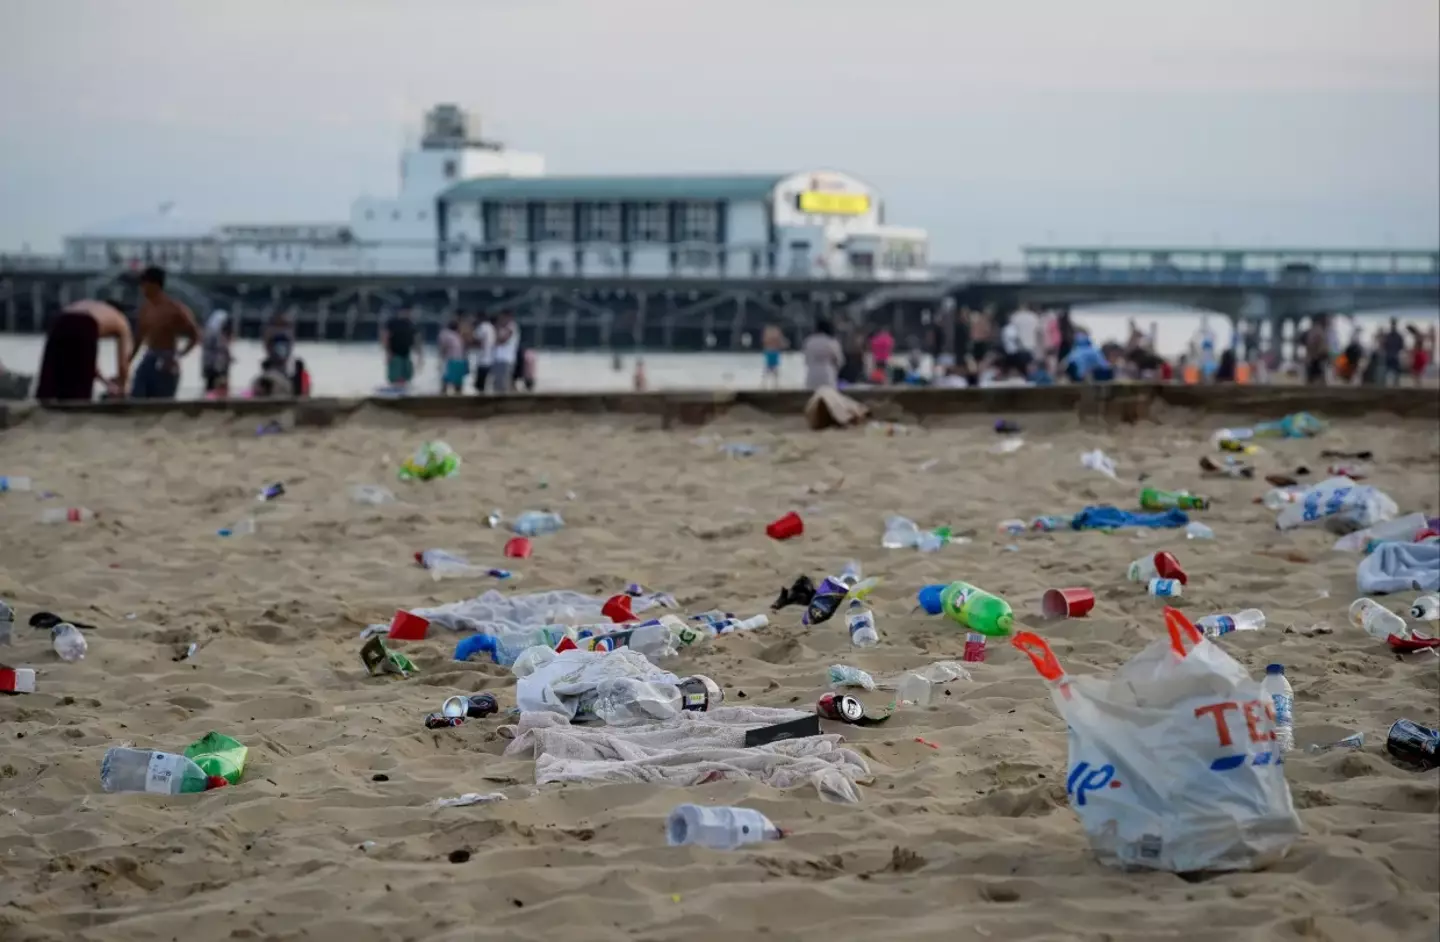 Locals are fuming with tourists trashing beaches and beauty spots.